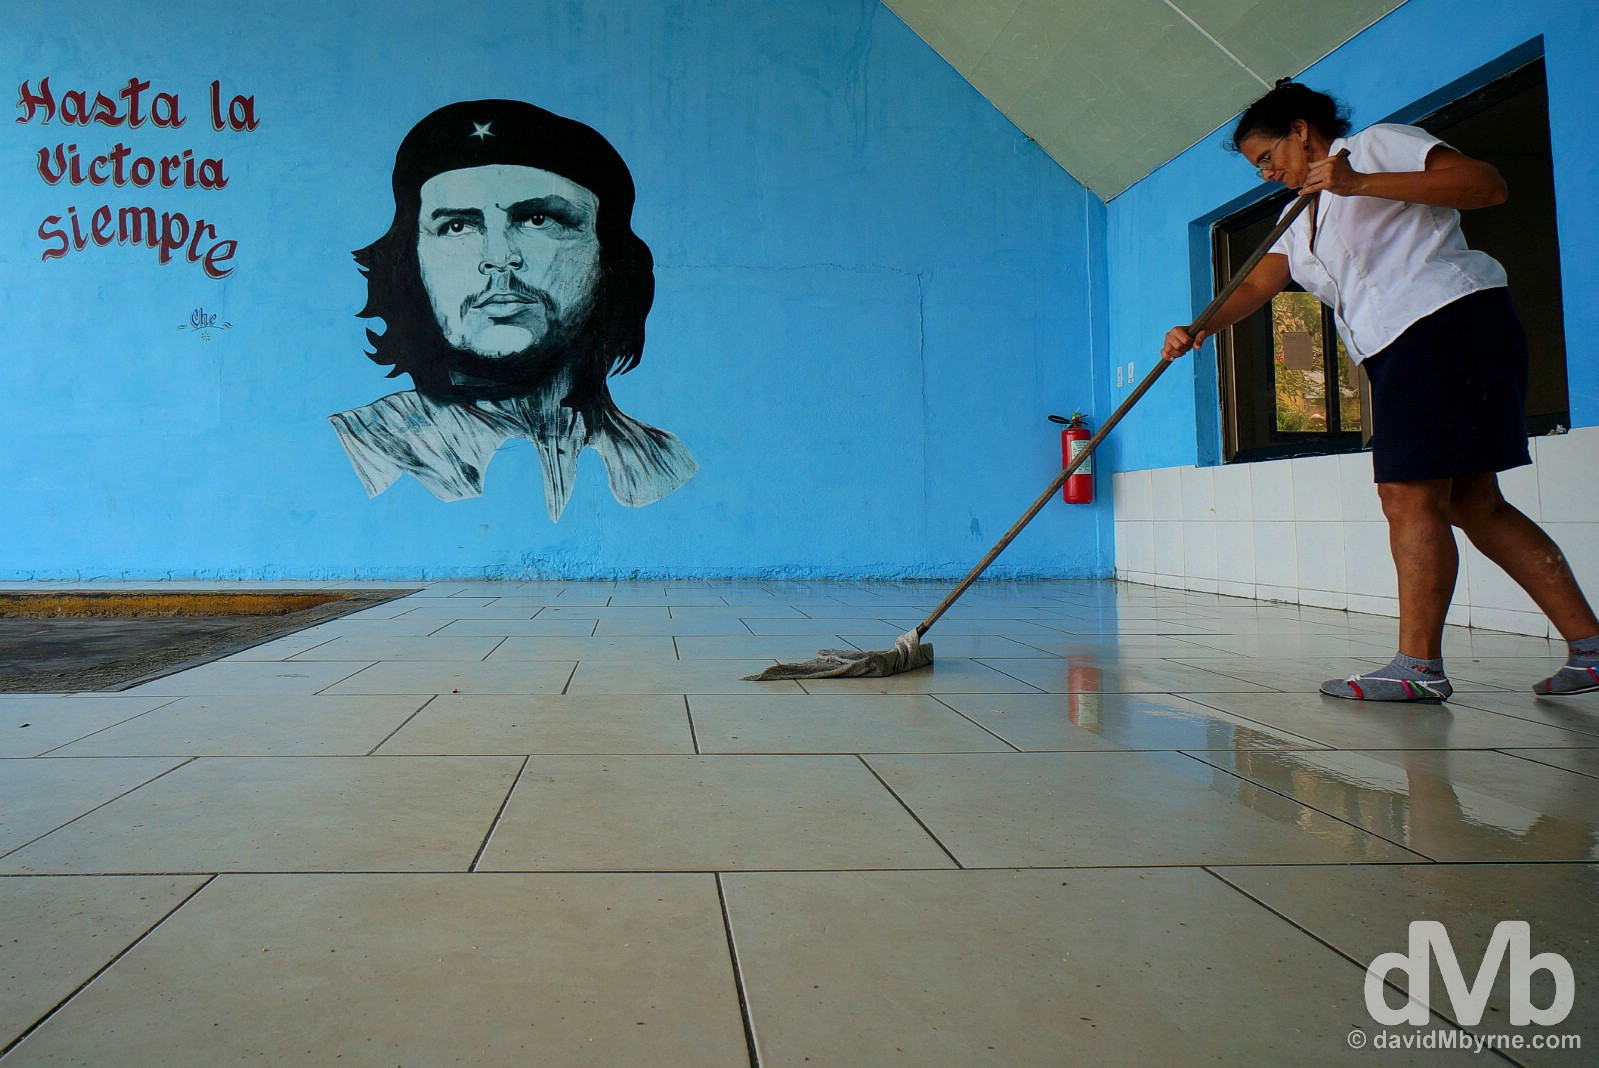 Mopping the floor of the bus station in Santa Clara, Cuba. May 3, 2015.